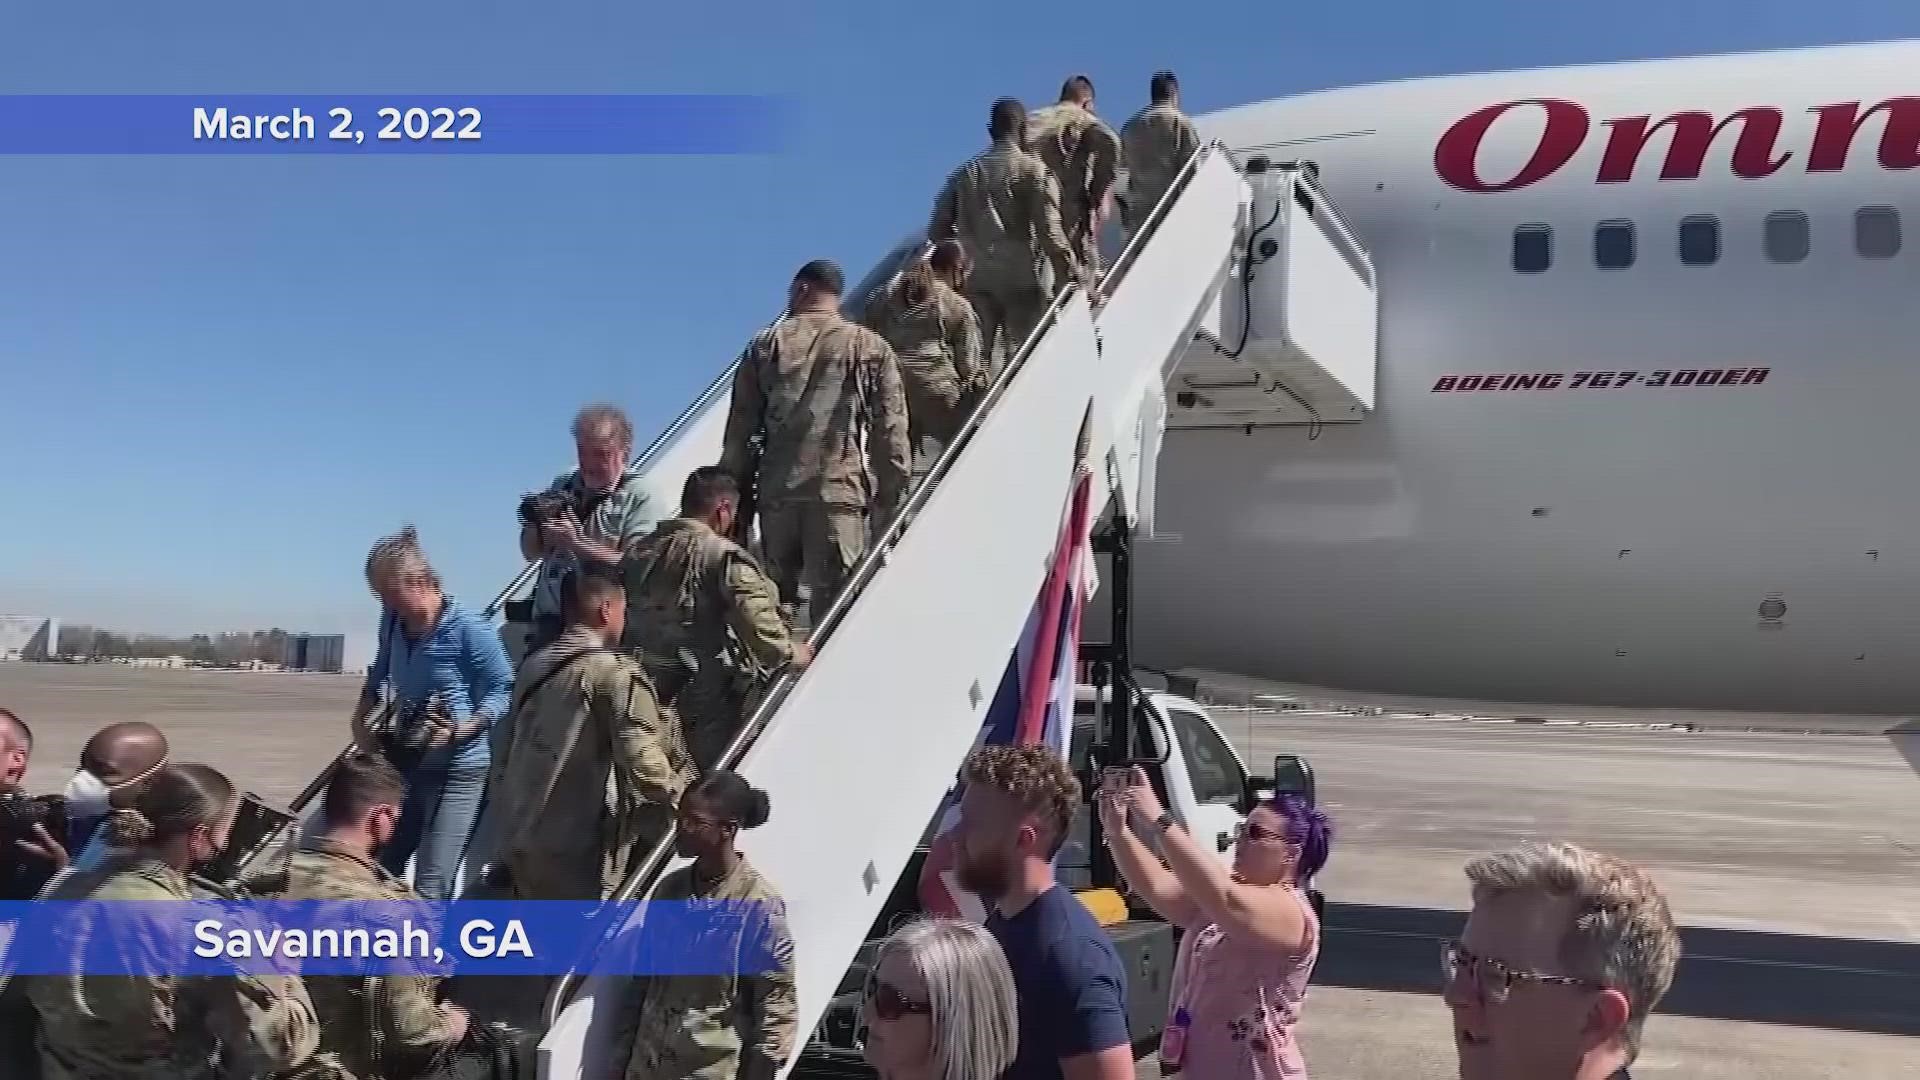 Soldiers from the U.S. Army's 3rd Infantry Division based at Fort Stewart, Georgia, are deploying to Germany to train with NATO allies.